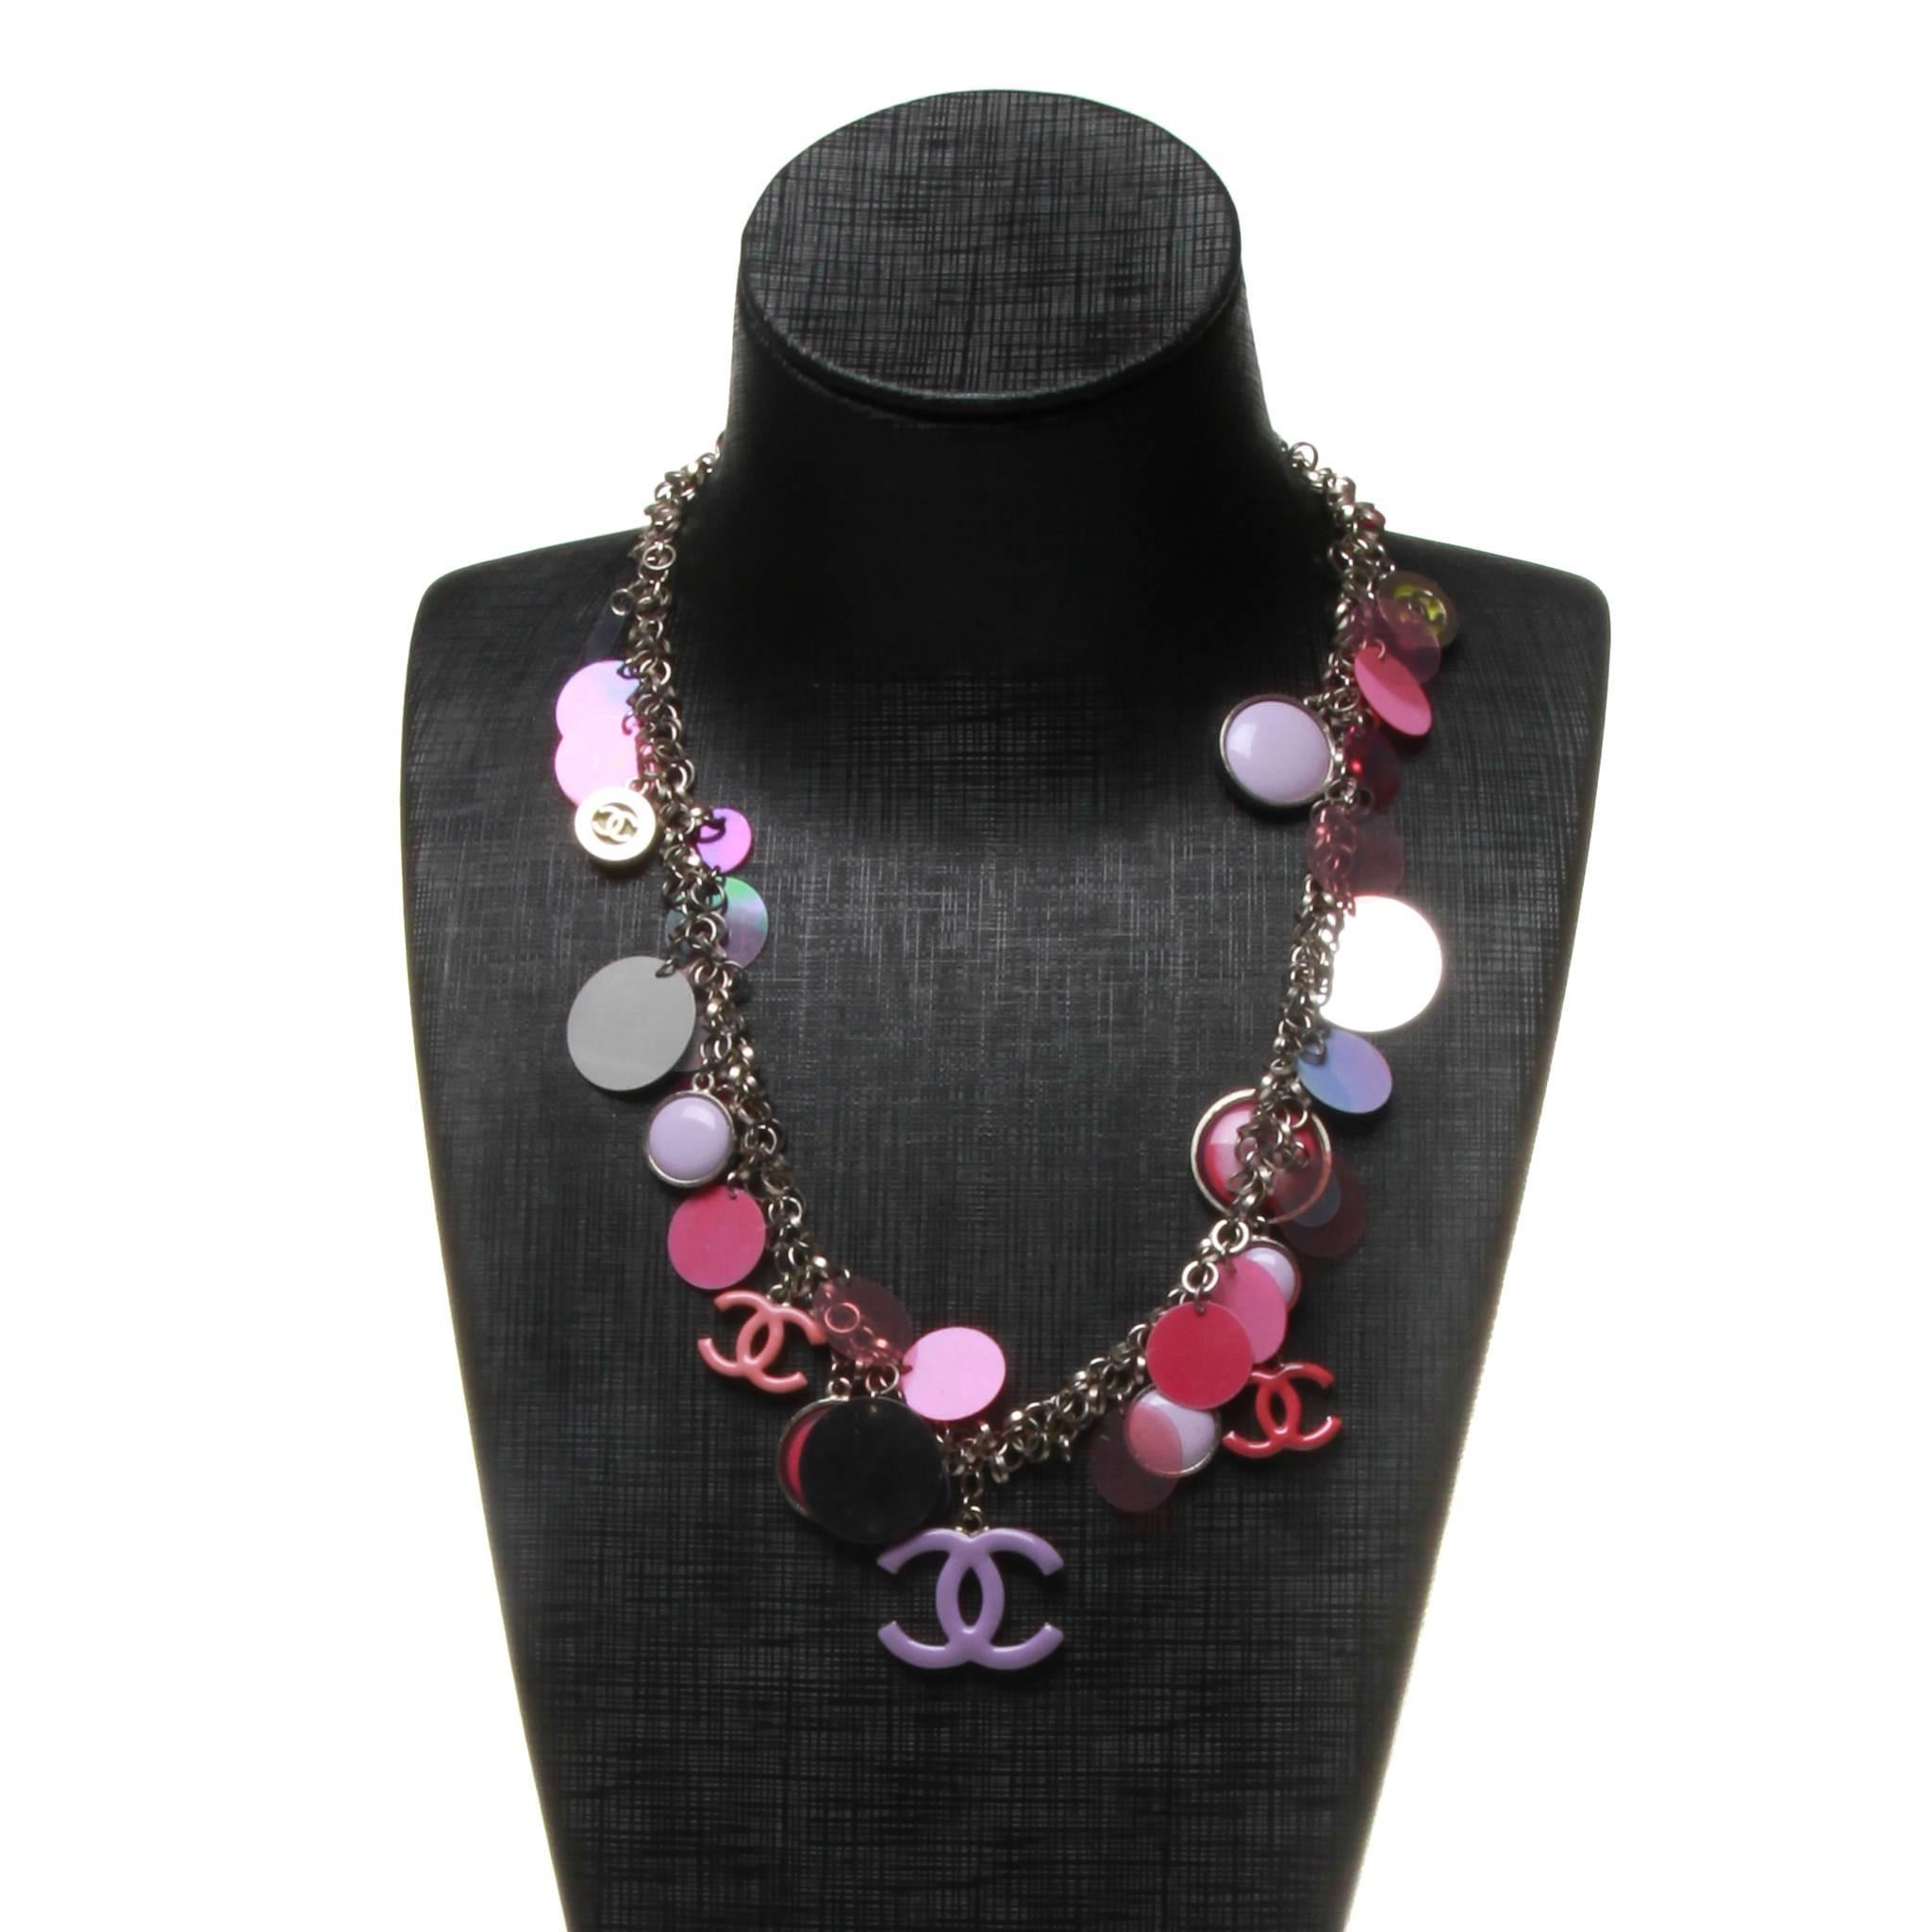 Chanel necklace featuring a motif of purple, pink, grey, green and translucent sequin disks and CC charms on a silver-tone rolo chain with loose silver links running its length. 
Lobster clasp closure at back with CC disk and date stamp 04 P.

